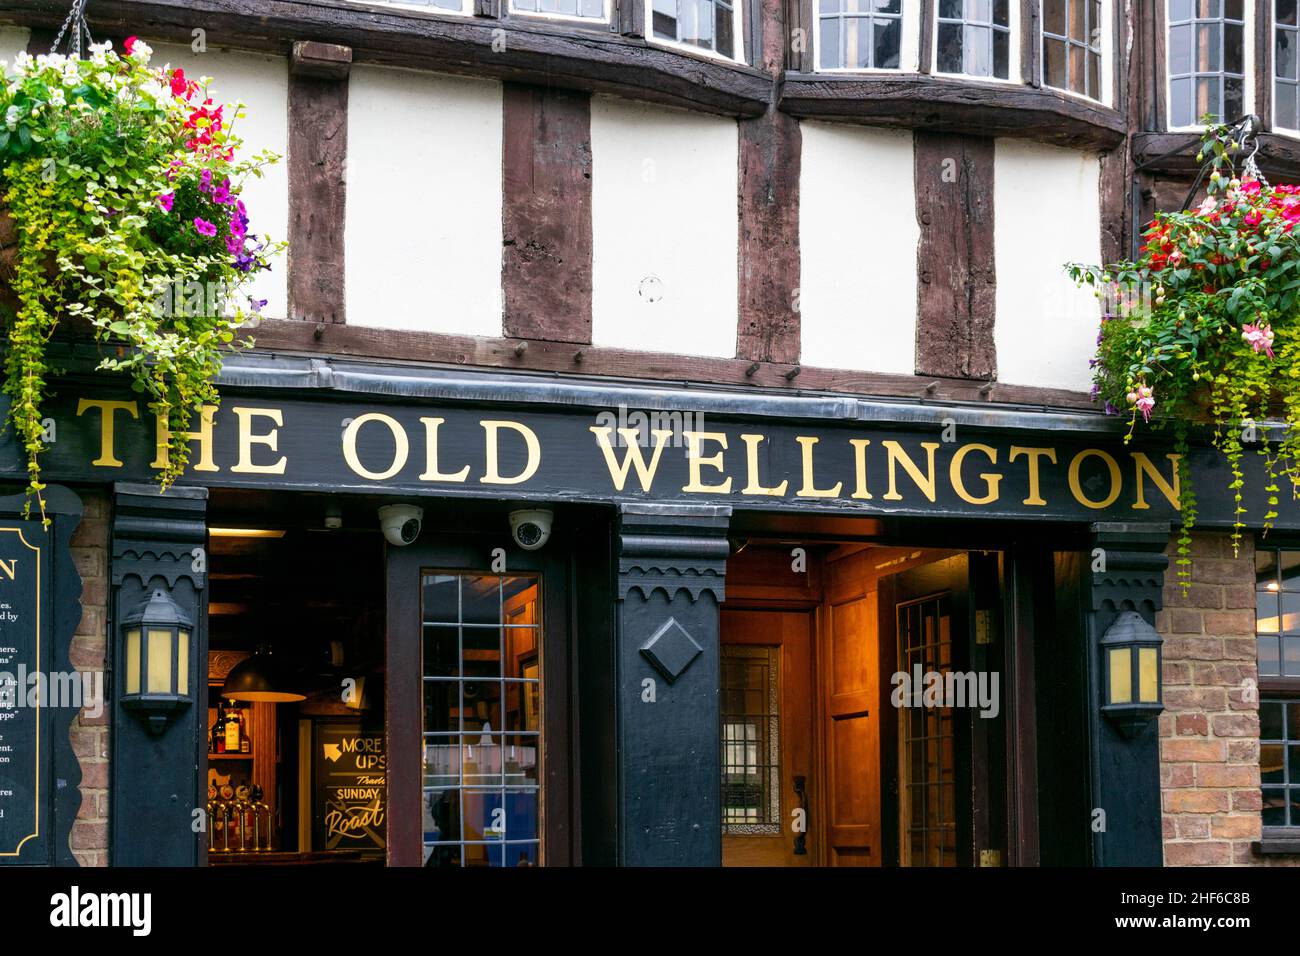 Manchester, UK - 22nd September 2019: The Old Wellington, a public house in the Market place. It is the oldest building in the city centre, built 1552 Stock Photo